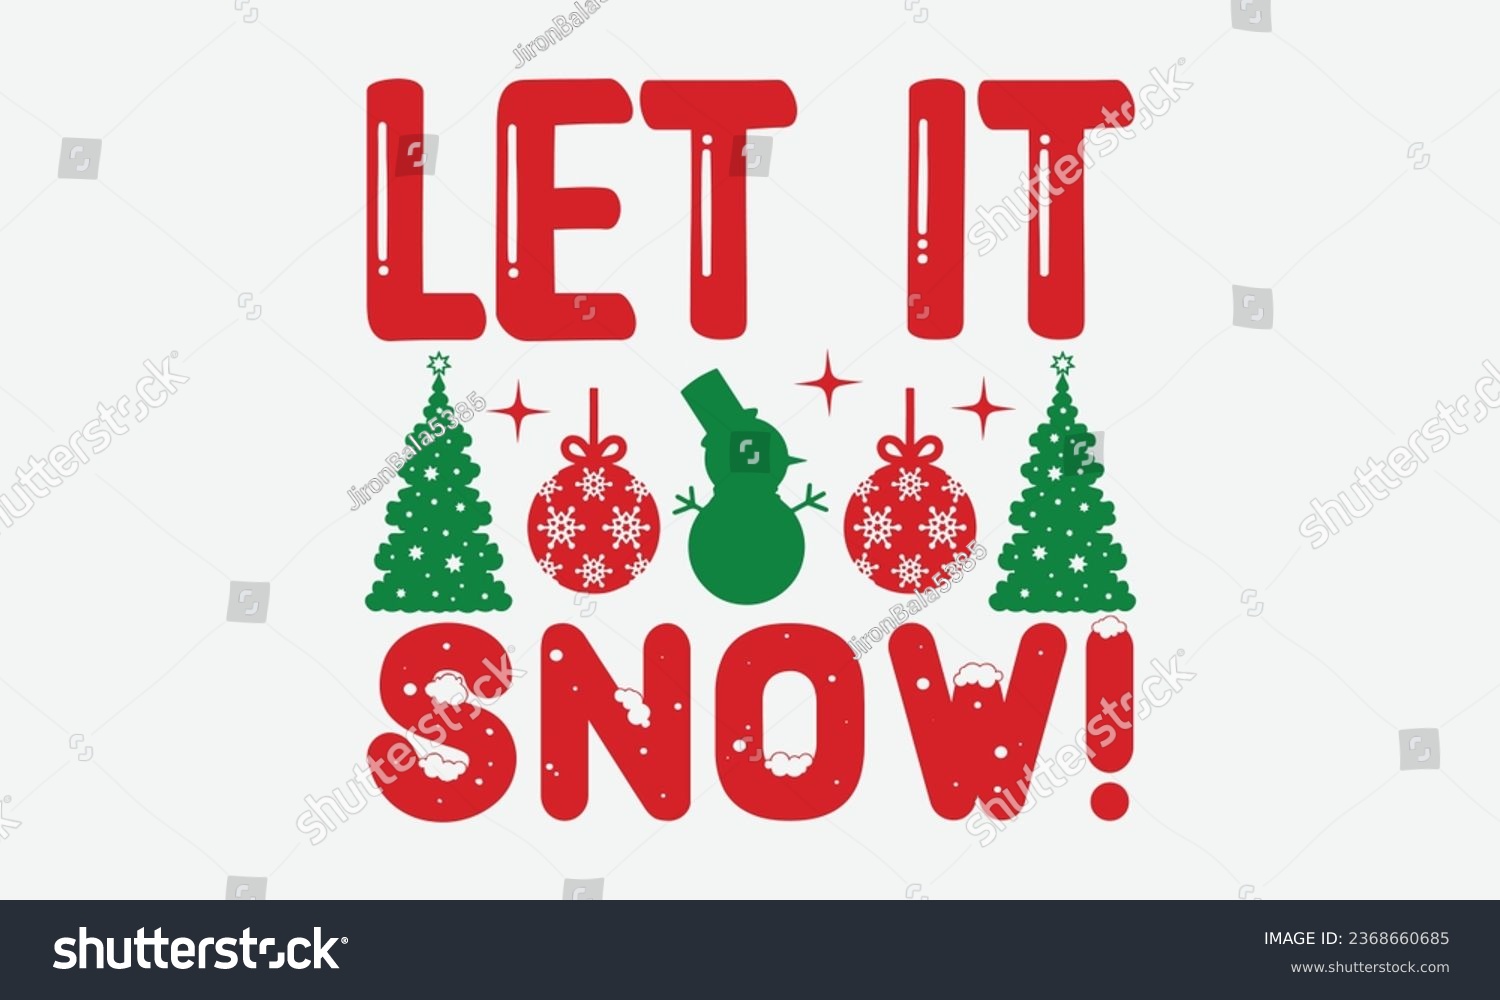 SVG of Let It Snow! - Christmas T-shirt Design,  Files for Cutting, Isolated on white background, Cut Files for poster, banner, prints on bags, Digital Download. svg